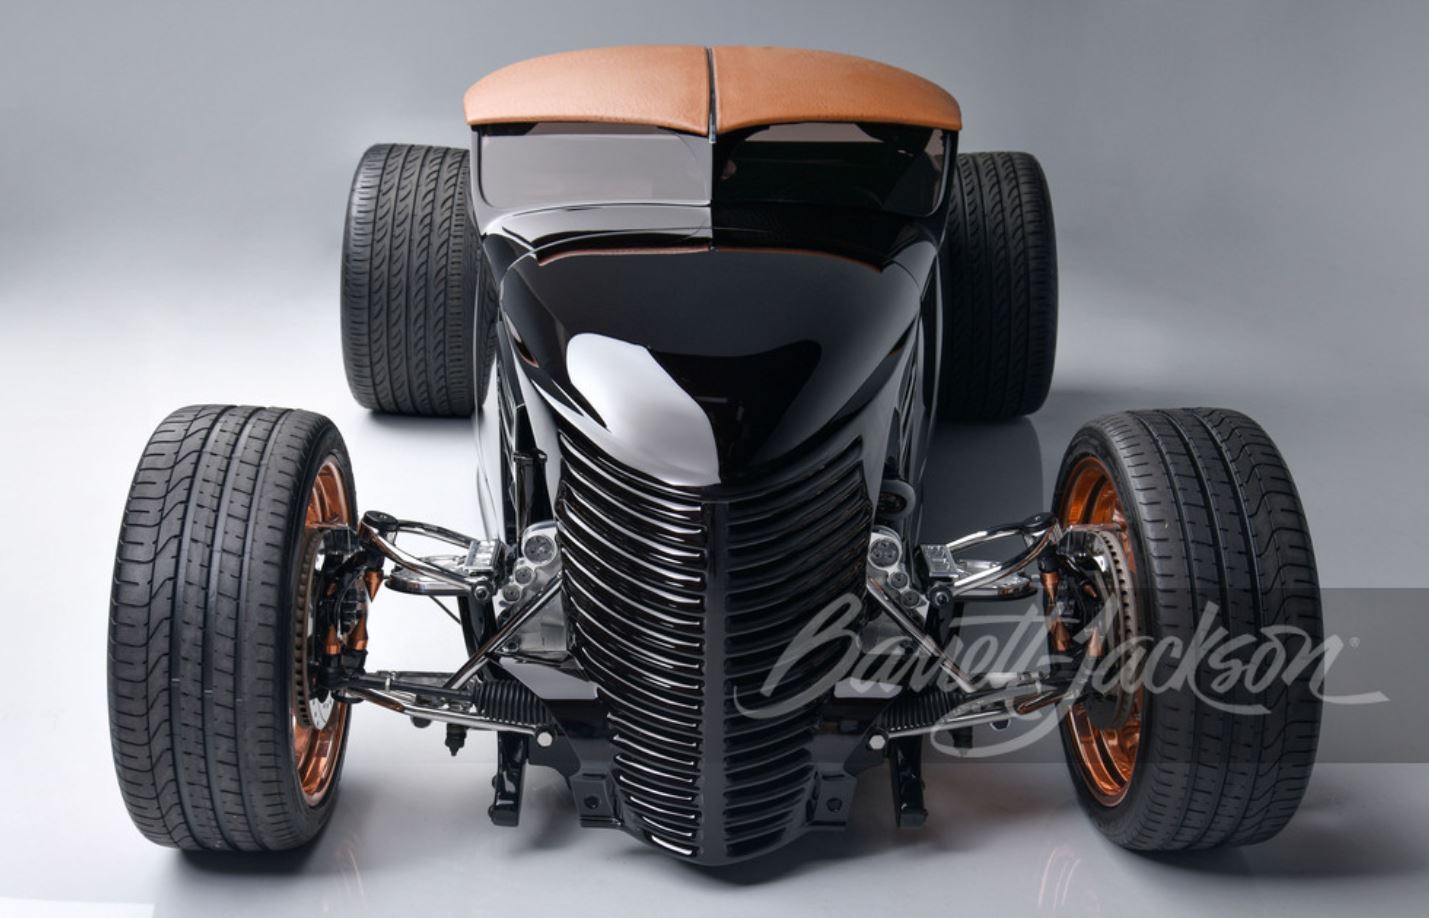 Head-on view of a black custom rat rod sits on copper finished, one-off wheels.